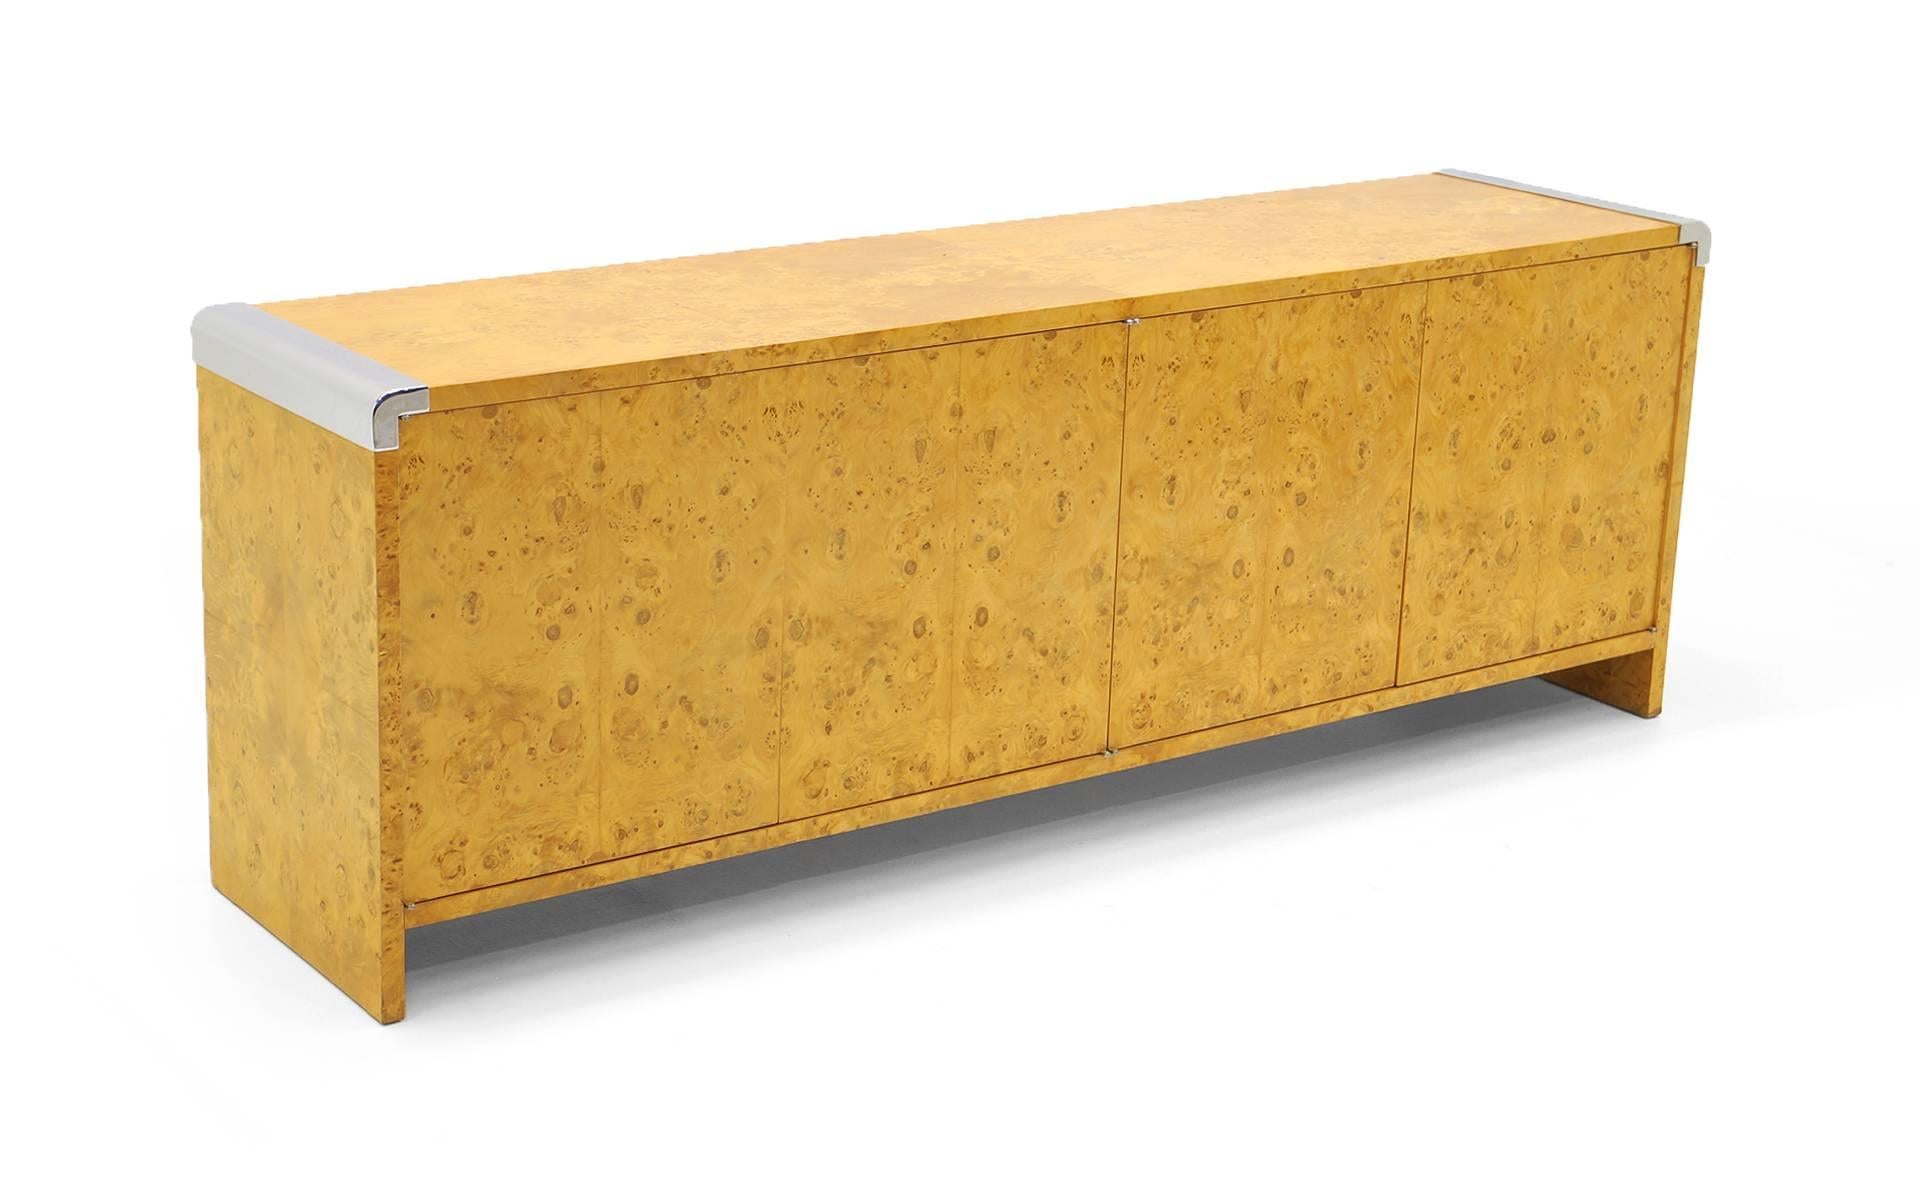 Milo Baughman for Thayer Coggin olive wood burl credenza or buffet with chrome accents on the top ends. Push open doors reveal adjustable shelves on ones side and drawers on the other.